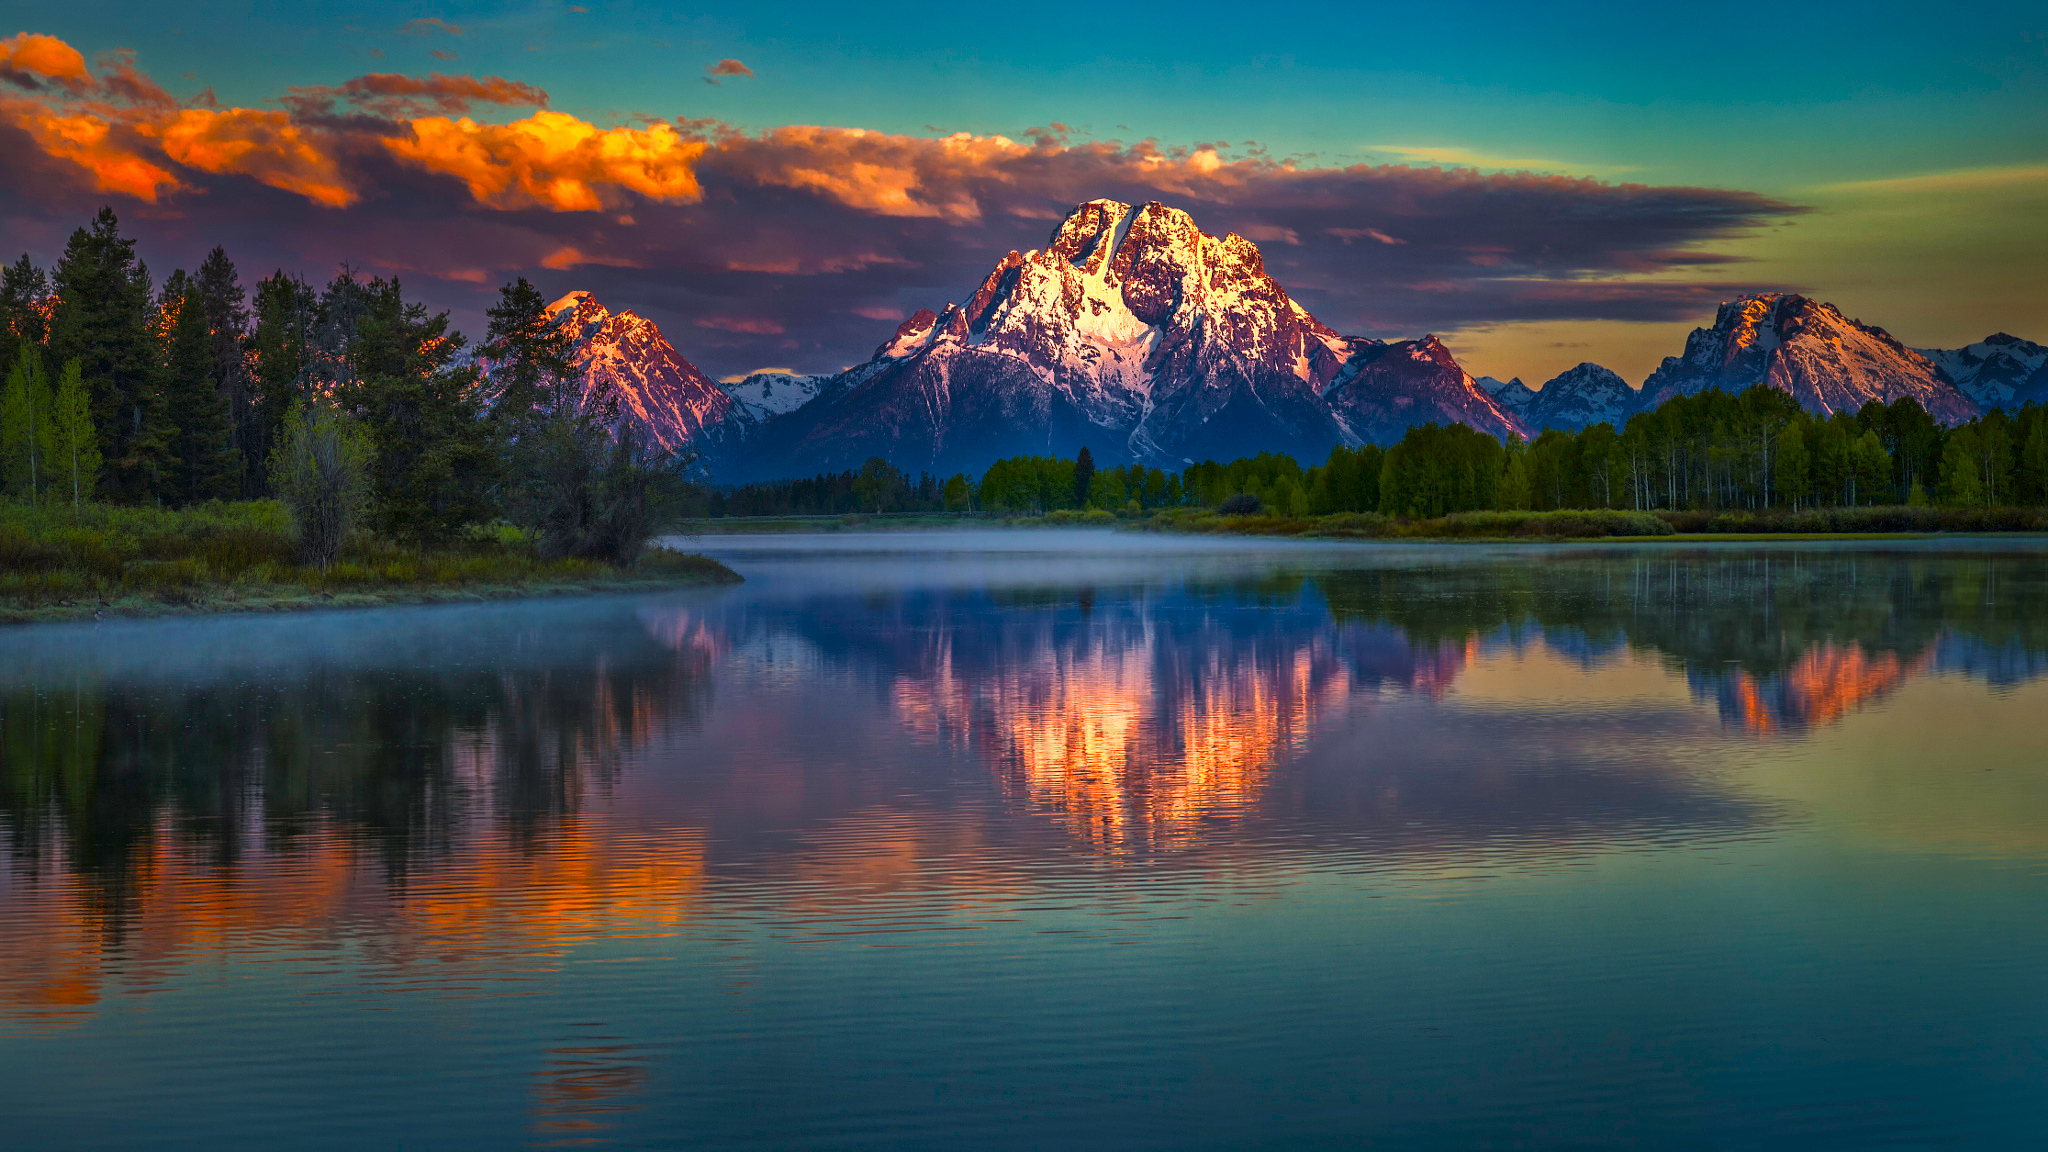 A mountain with a snowy peak is reflected in the lake at sunset